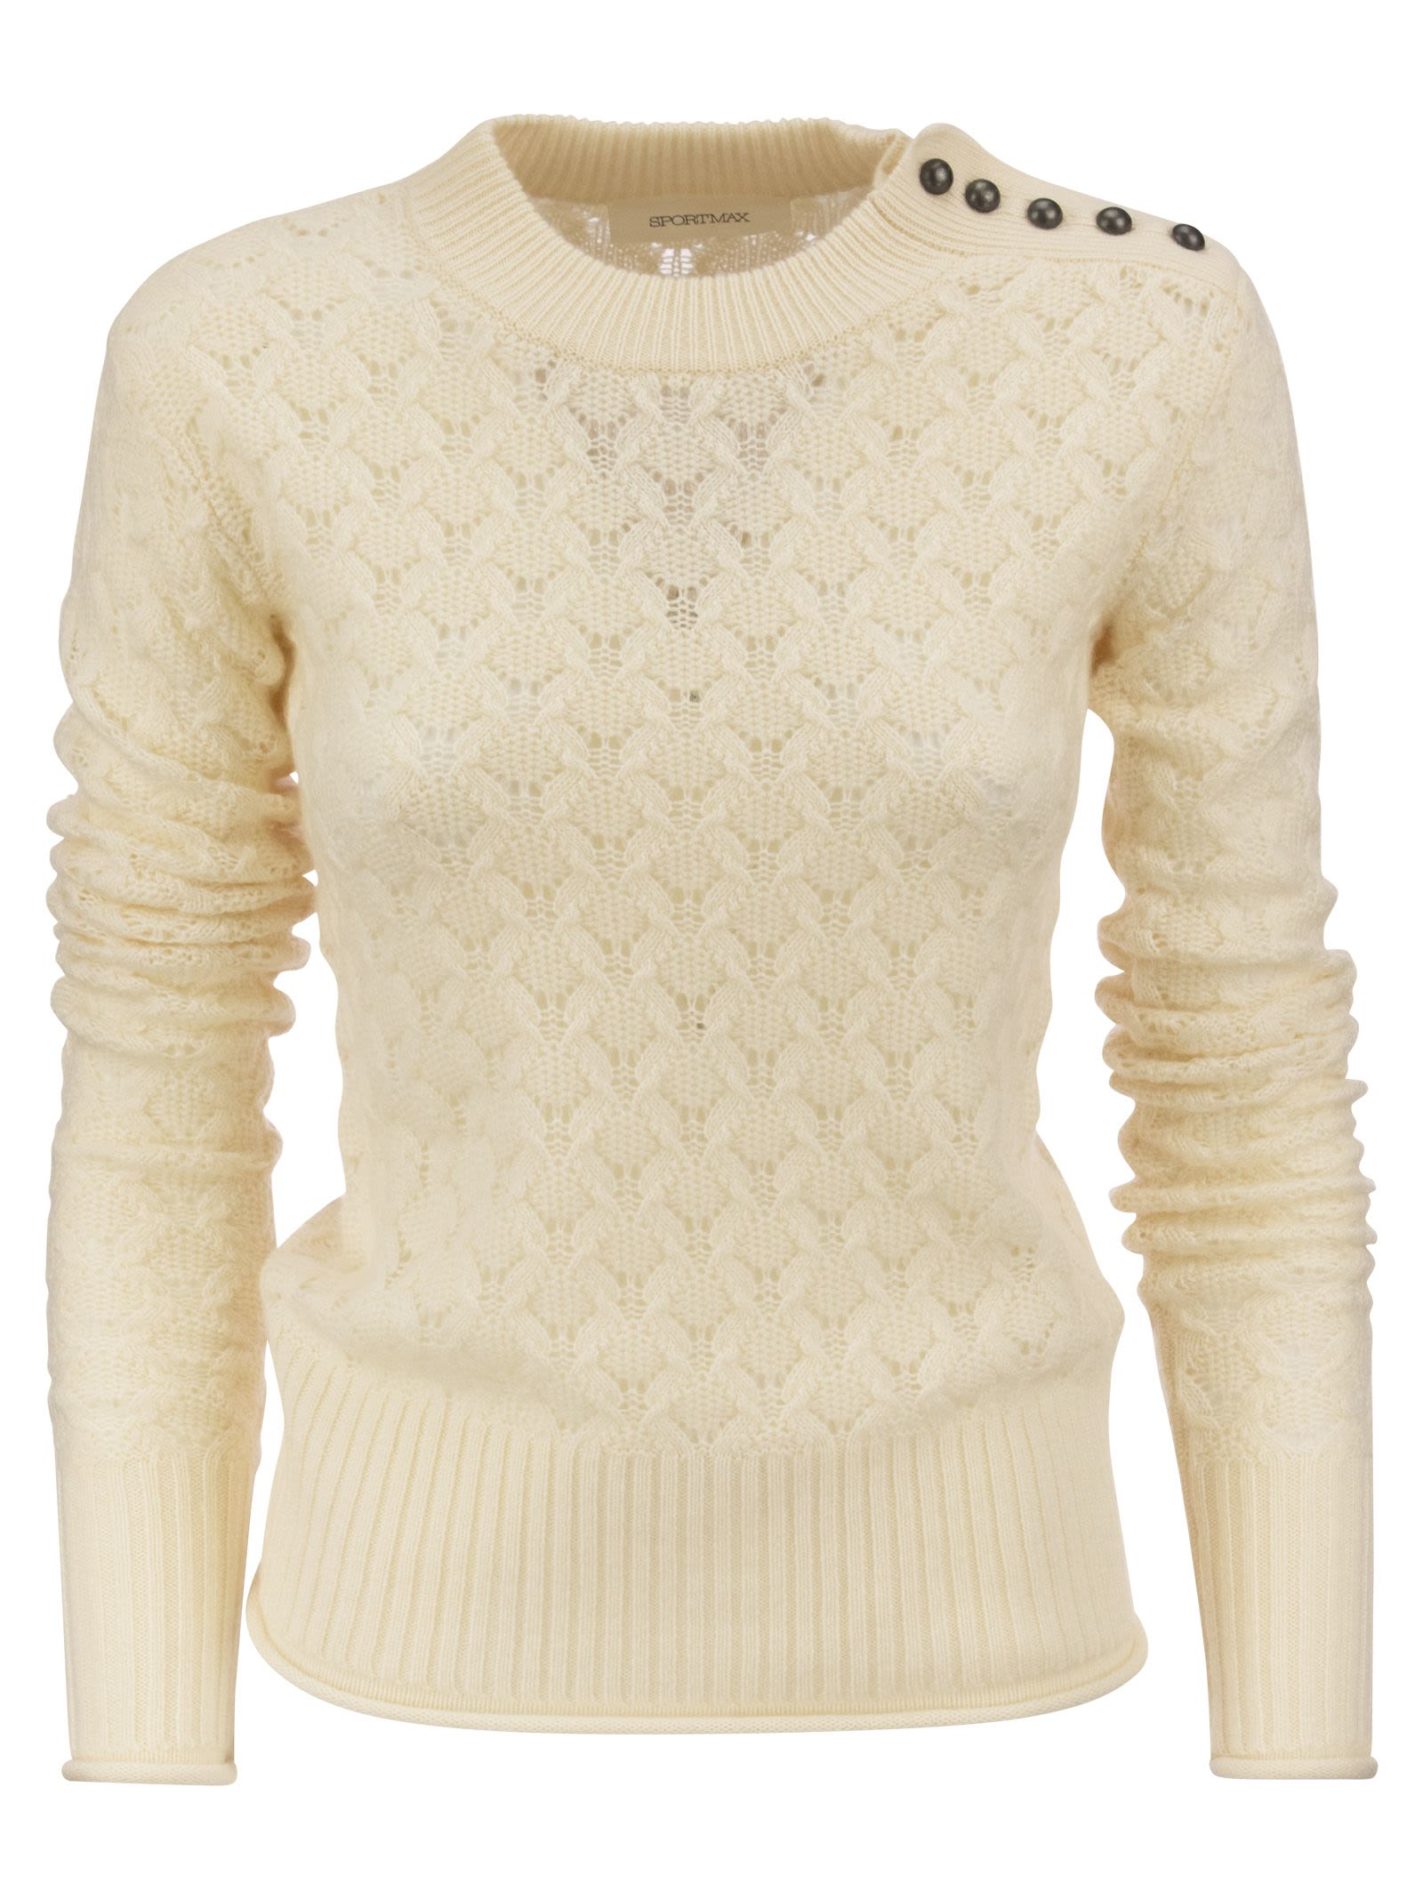 THEODOR - Wool and cashmere sweater - Bellettini.com